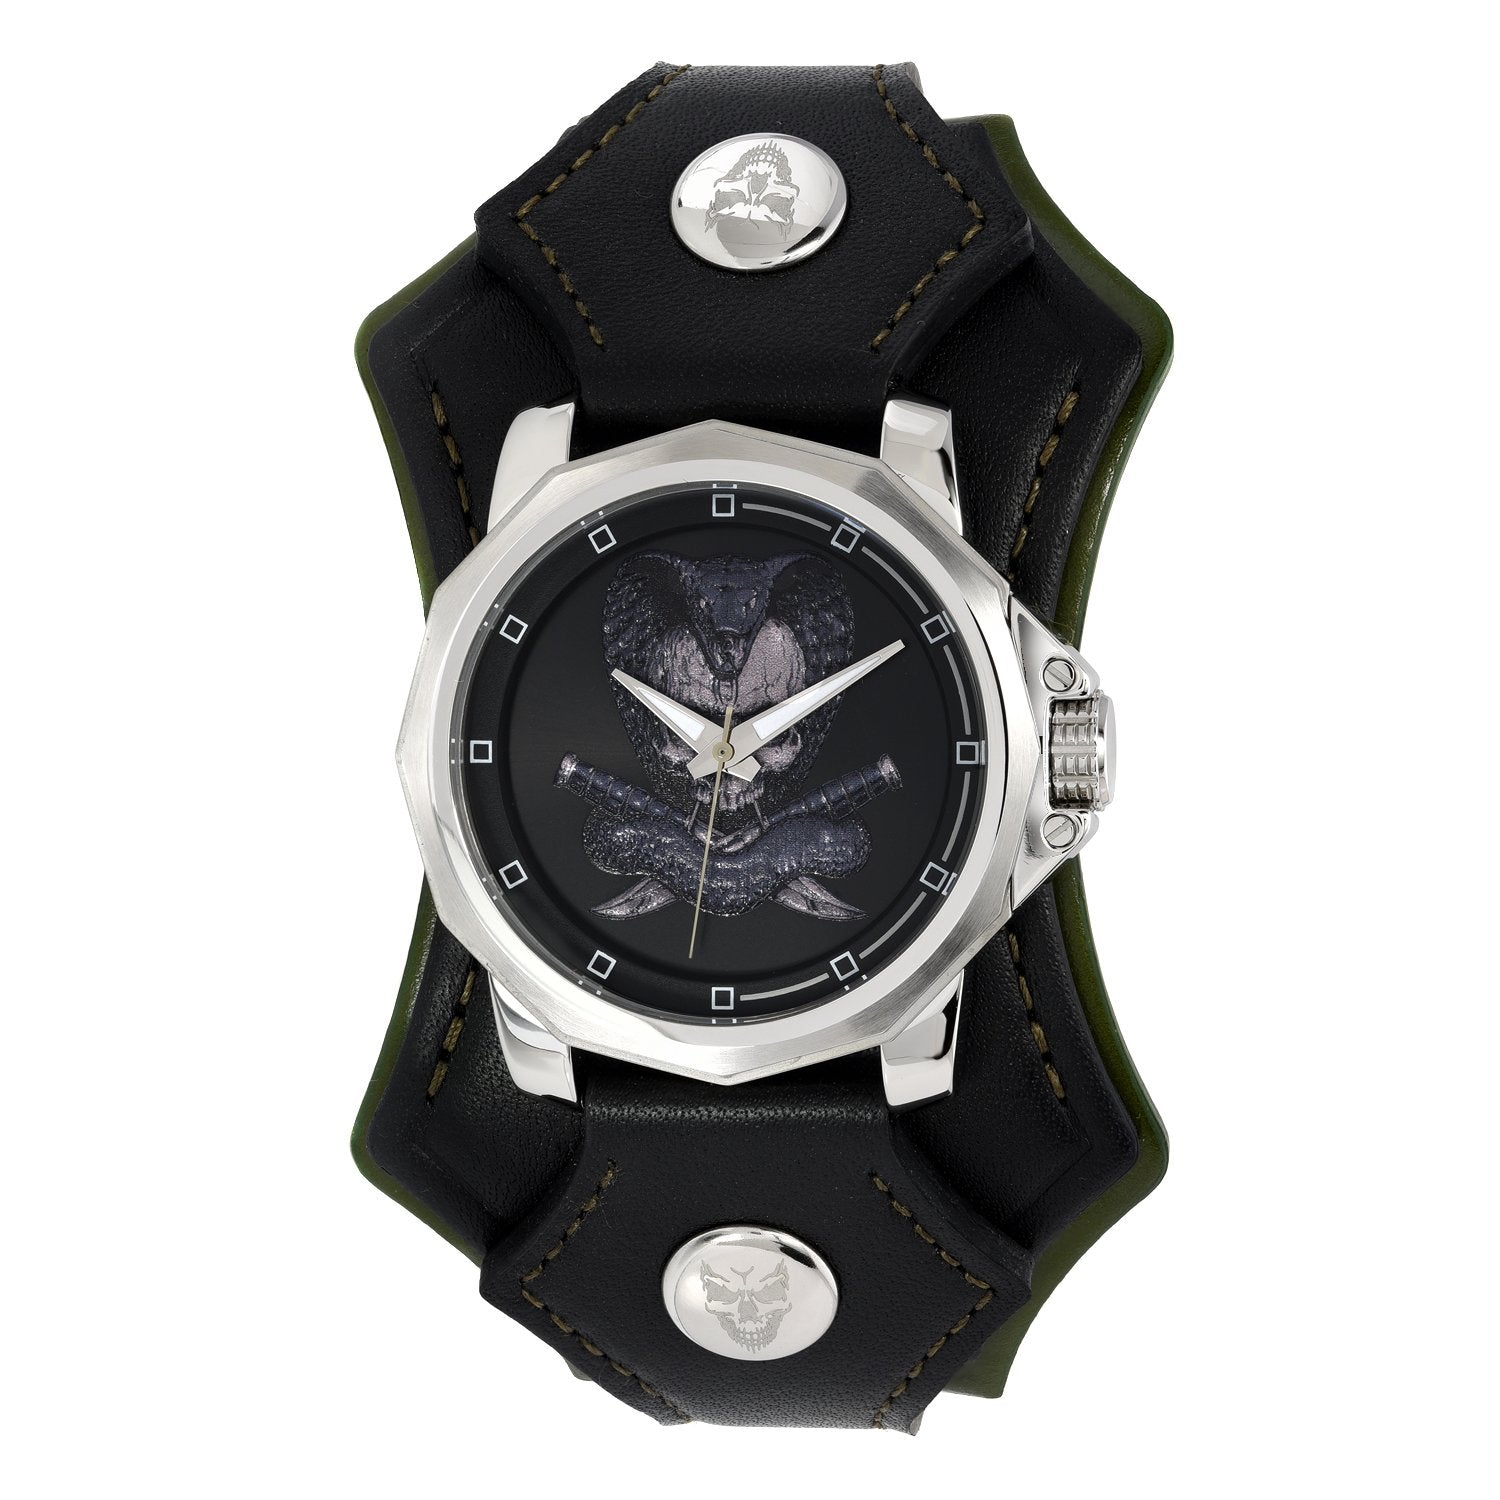 Serpent Watch - Mens Watches - Affliction Clothing